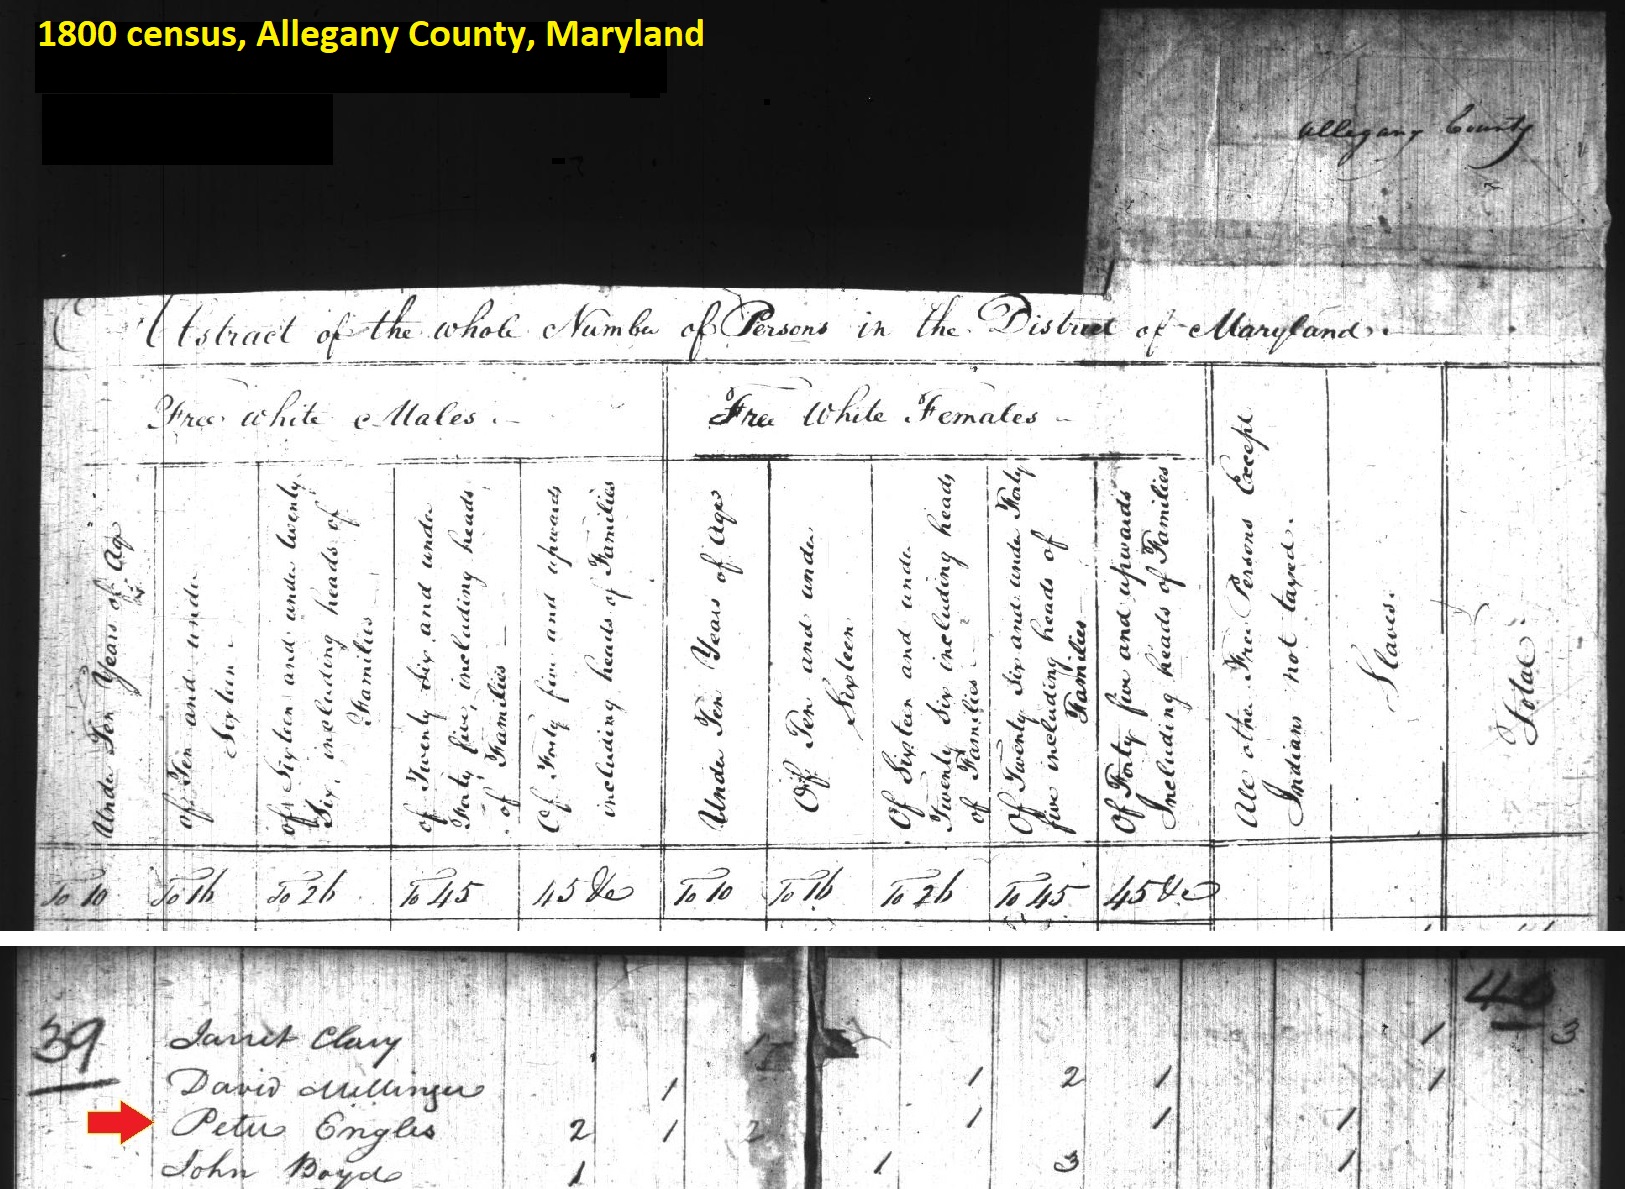 Peter Engles in an excerpt from the 1800 census of Allegany County, Maryland. 